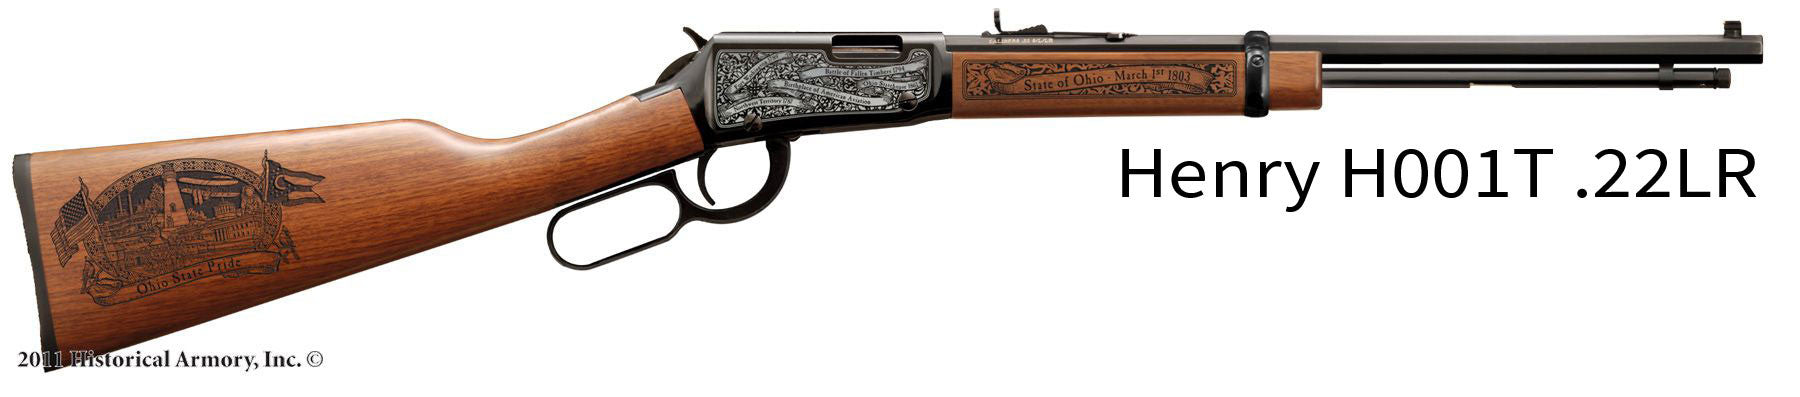 Ohio State Pride Engraved H00T Henry Rifle